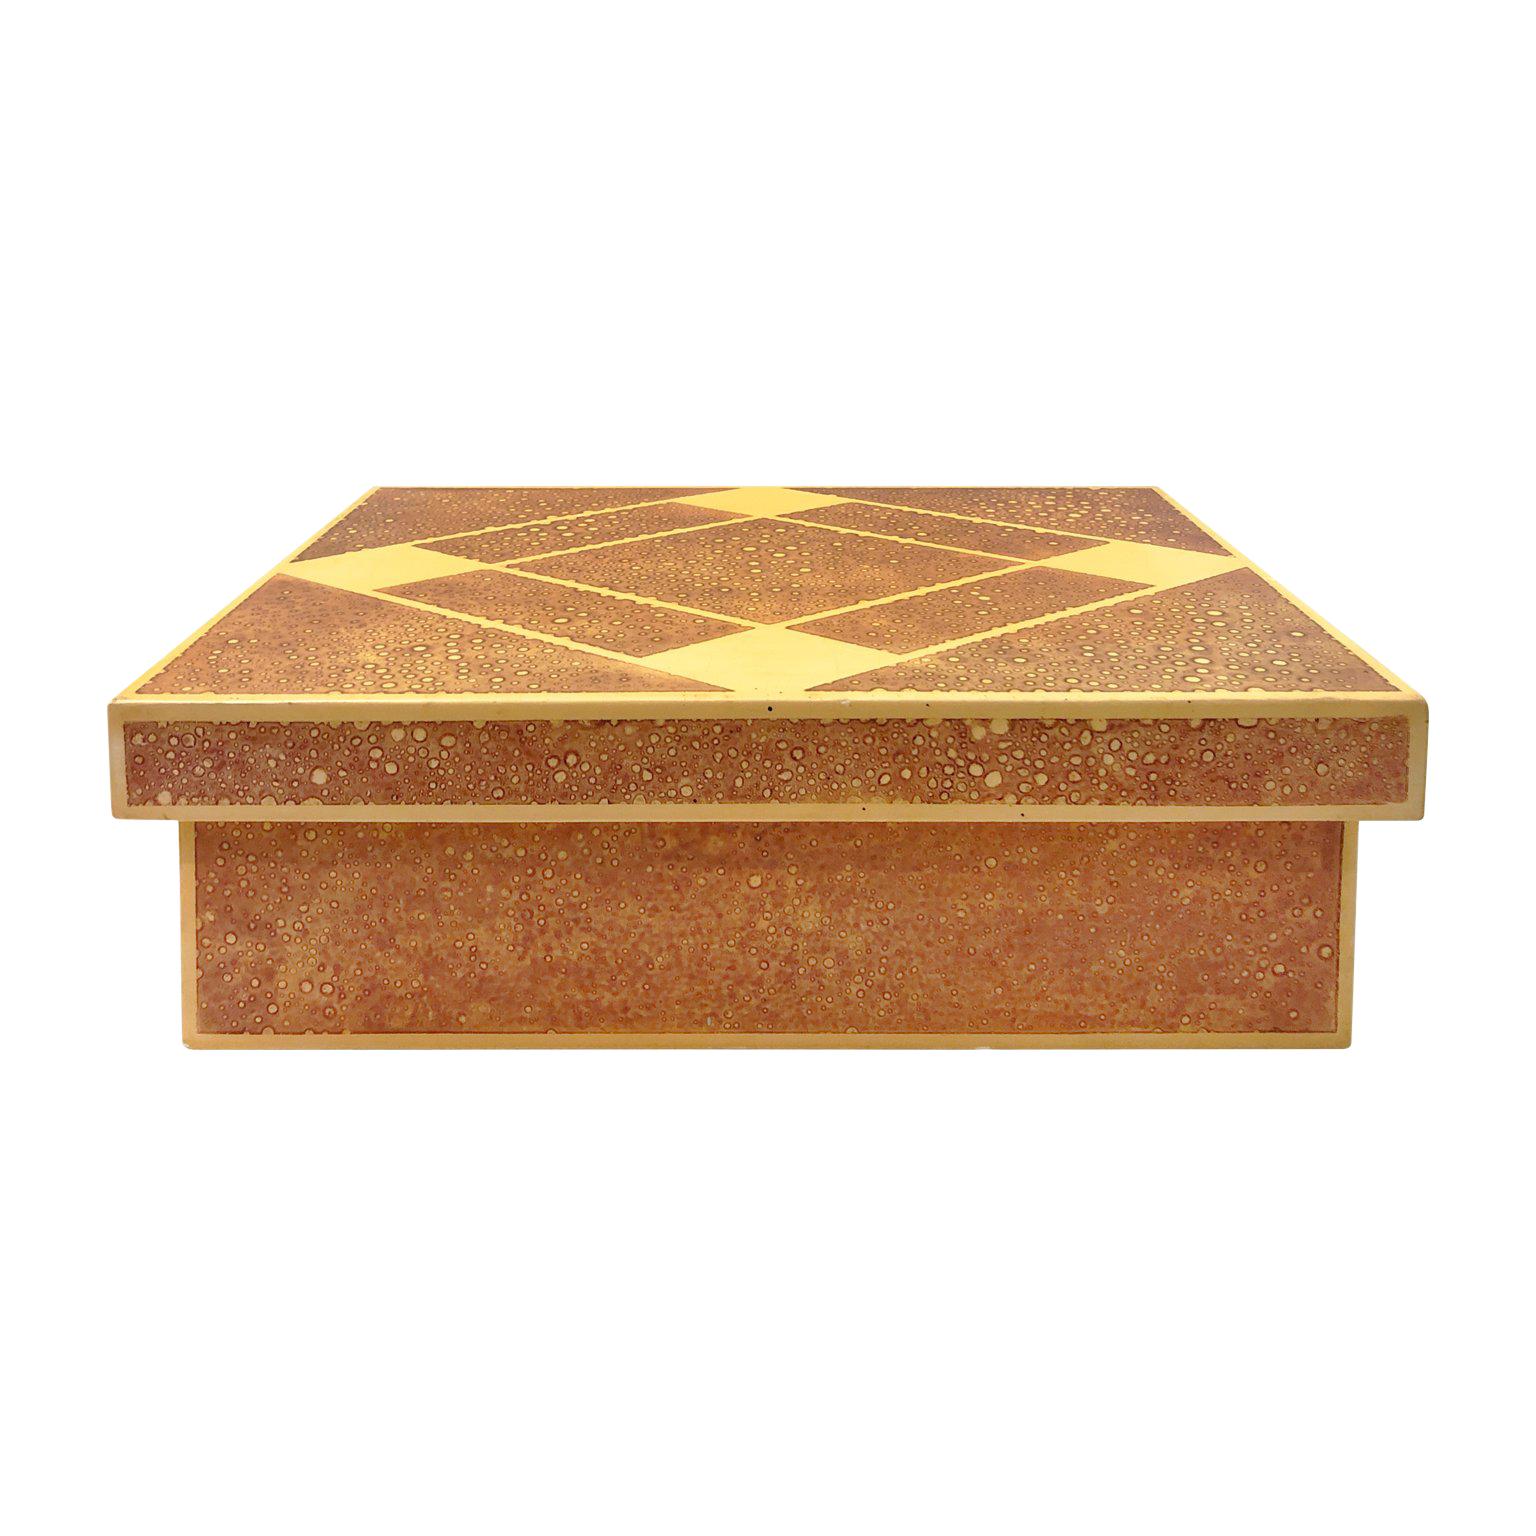 1970s Rectangular Lacquered Box with Diamond Patterned Lid For Sale